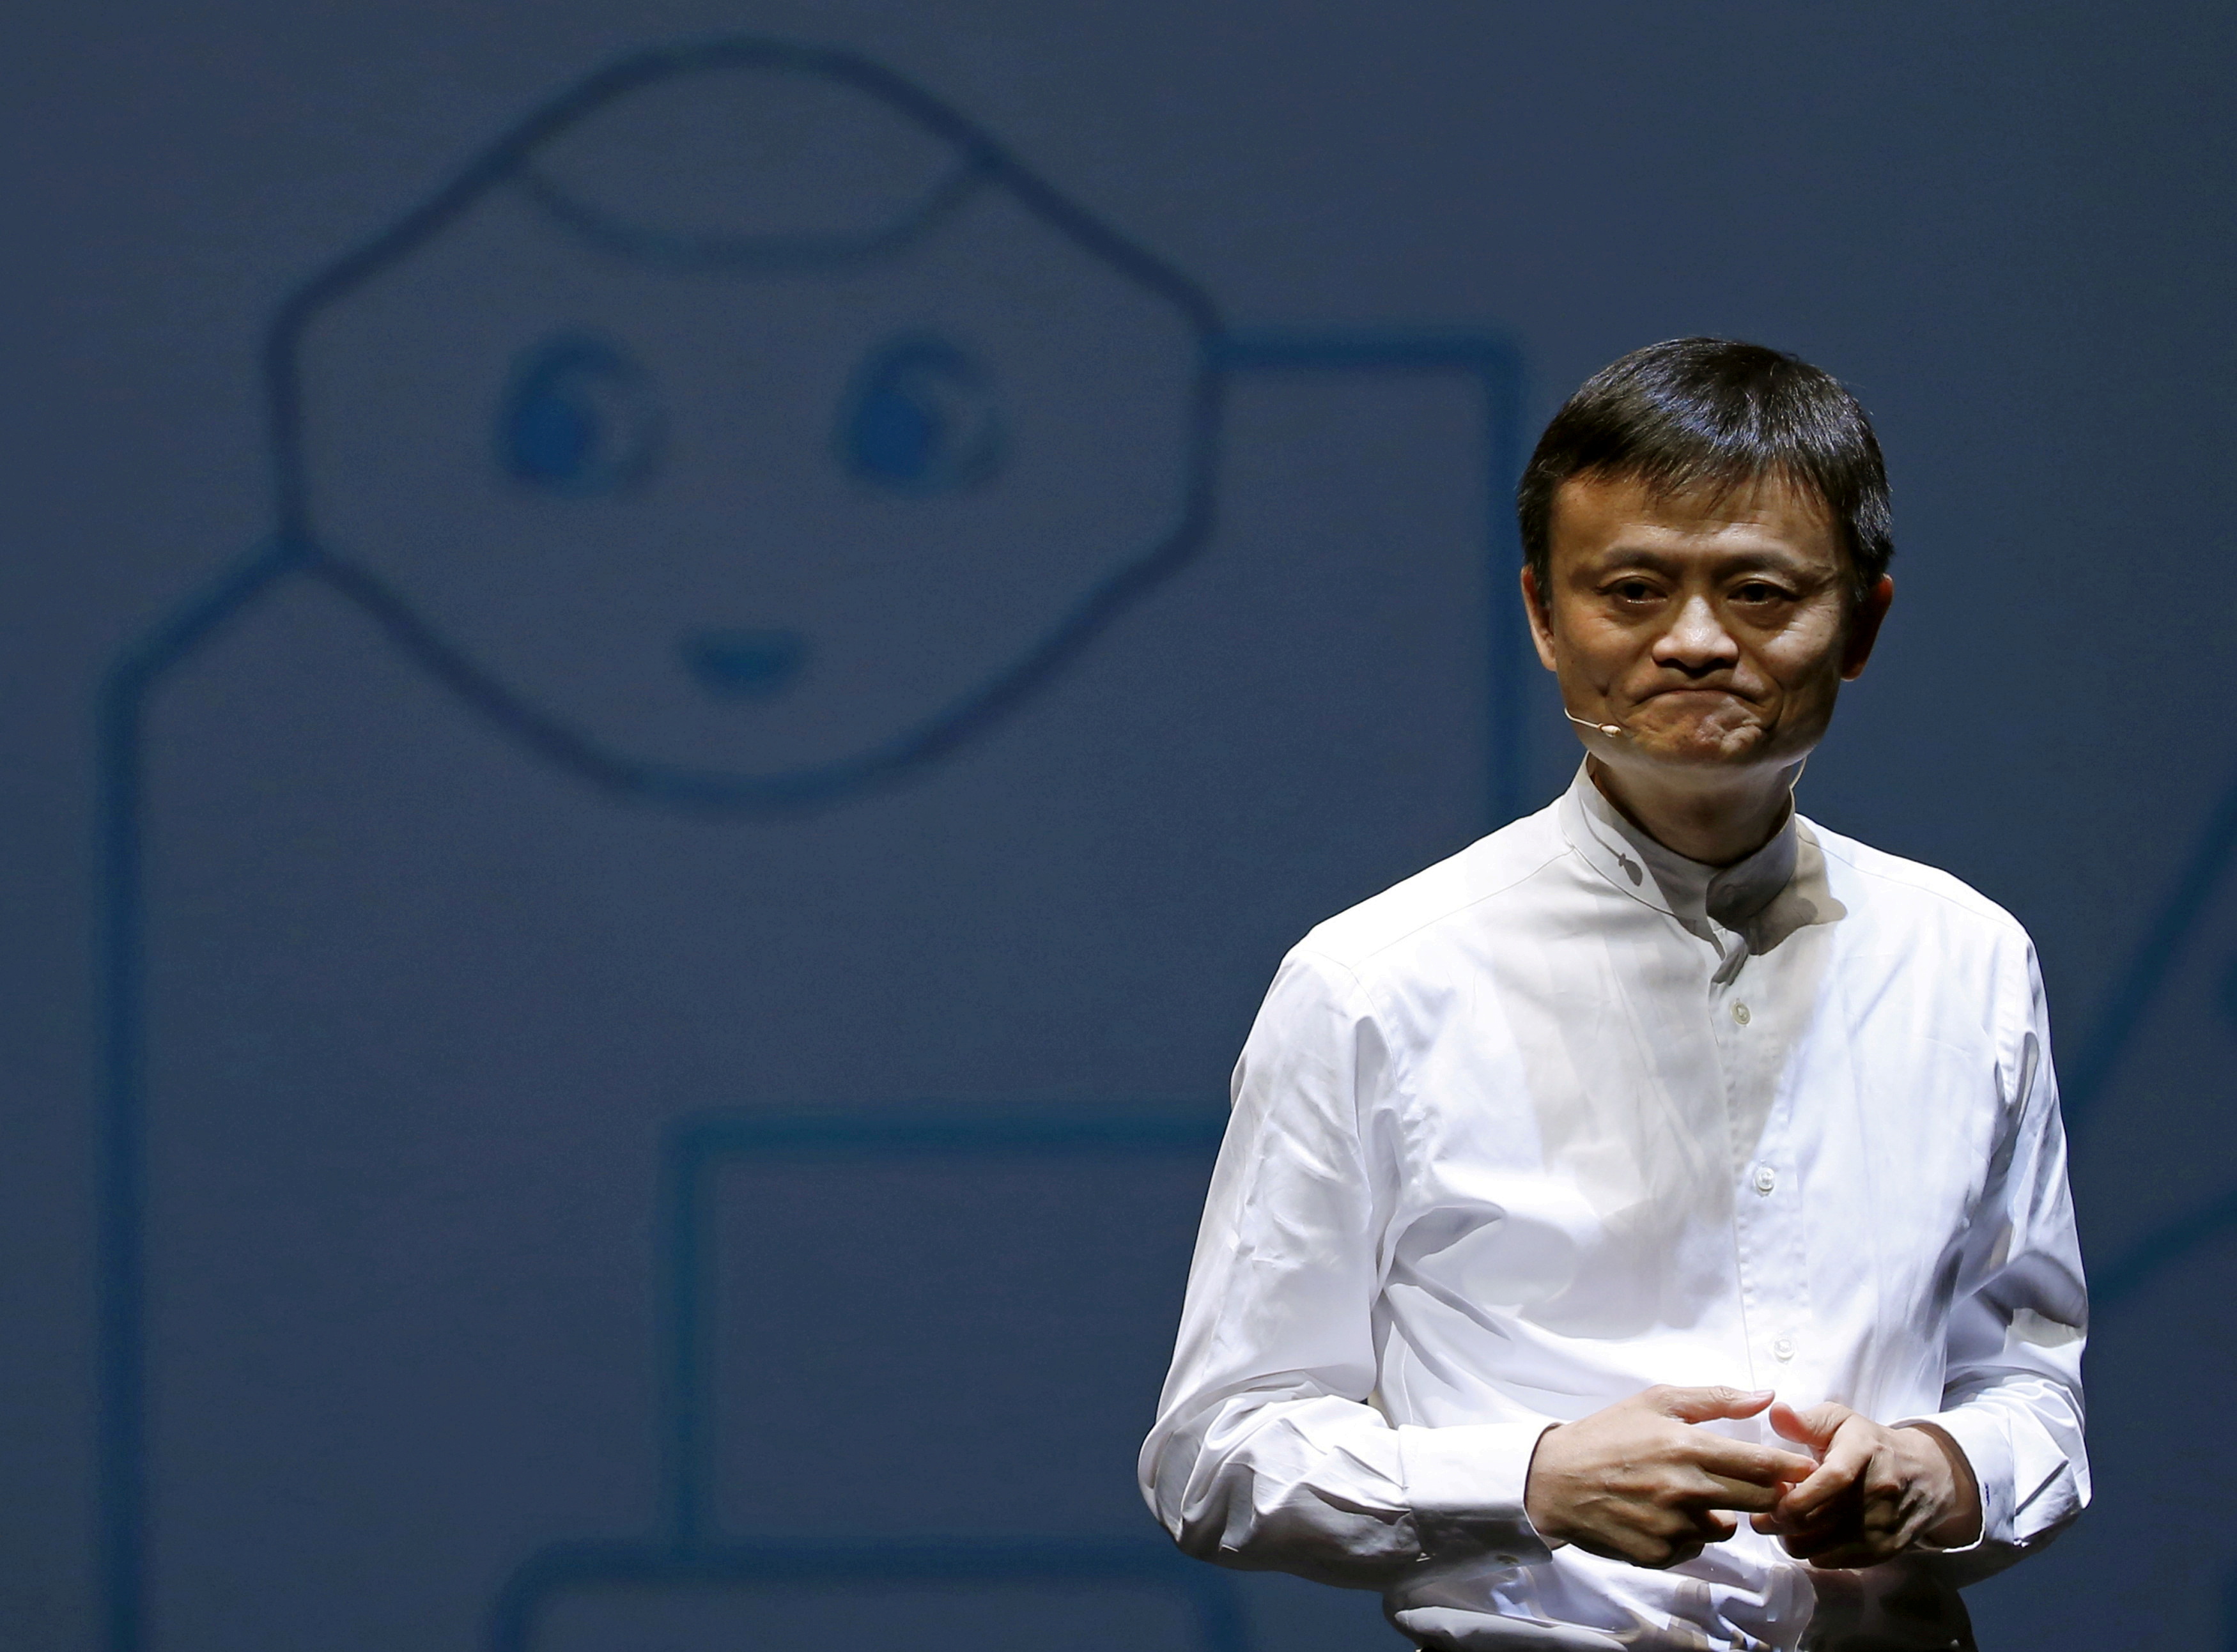 Jack Ma, founder and executive chairman of China's Alibaba Group, speaks in front of a picture of SoftBank's human-like robot named 'pepper' during a news conference in Chiba, Japan, June 18, 2015. REUTERS/Yuya Shino